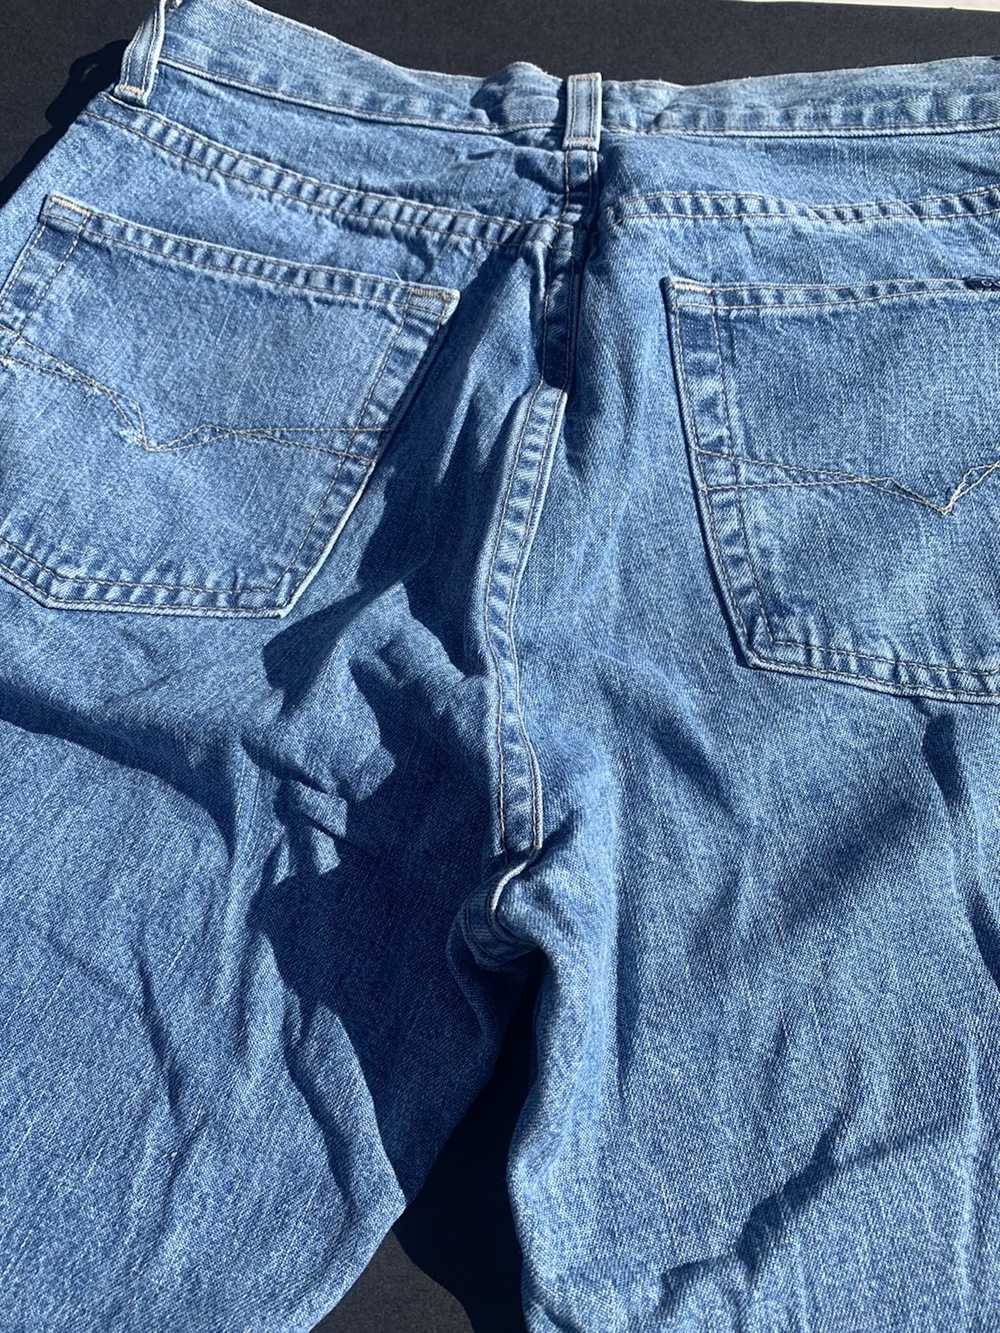 Guess Vintage guess denim jeans 90s made in USA - image 7